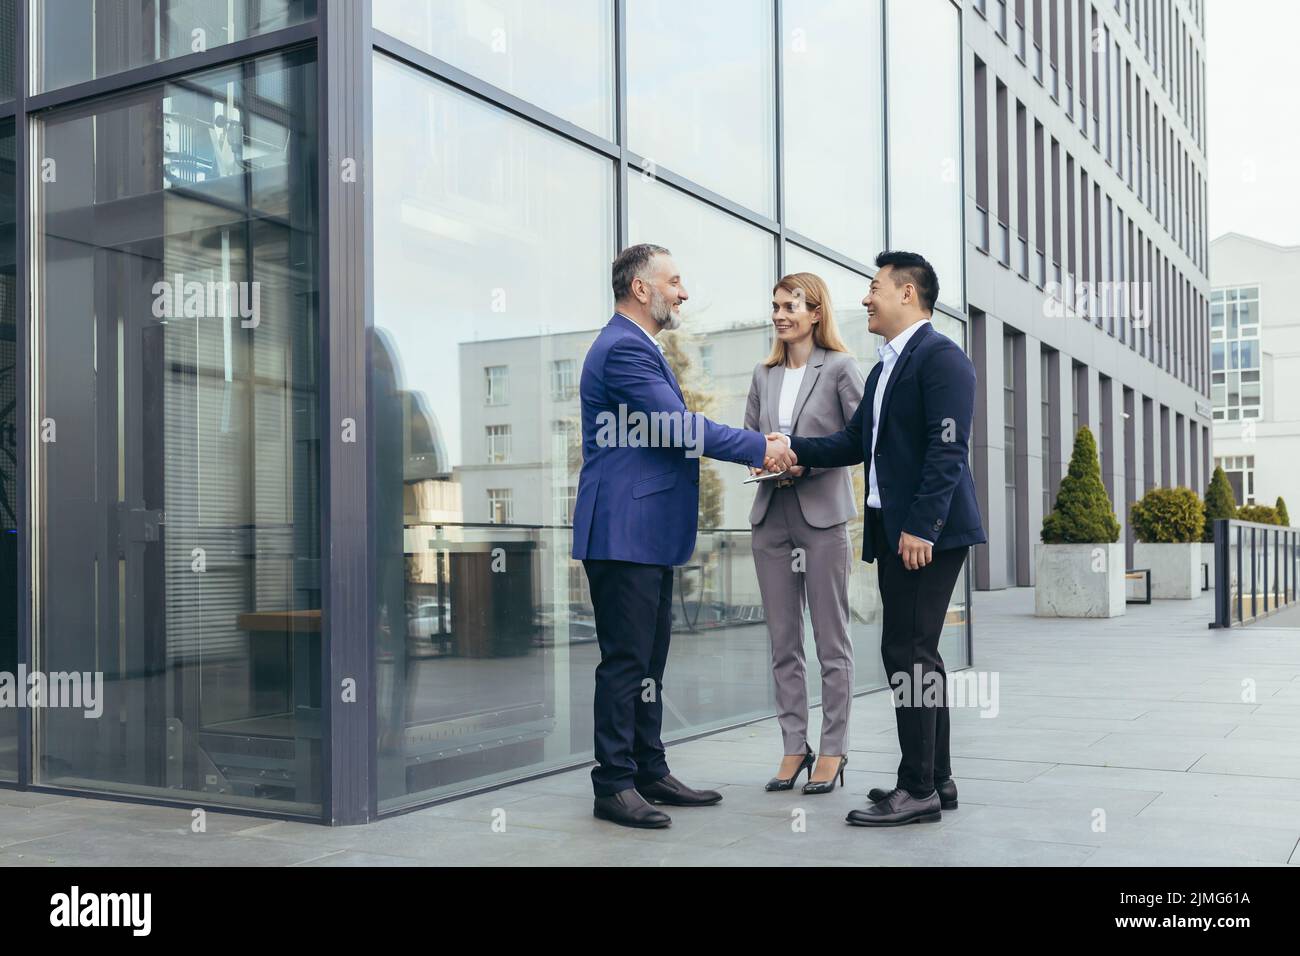 Business meet, colleagues happy team meet outside office, greet shake hands, diverse employees in business suit, man and woman business people Stock Photo